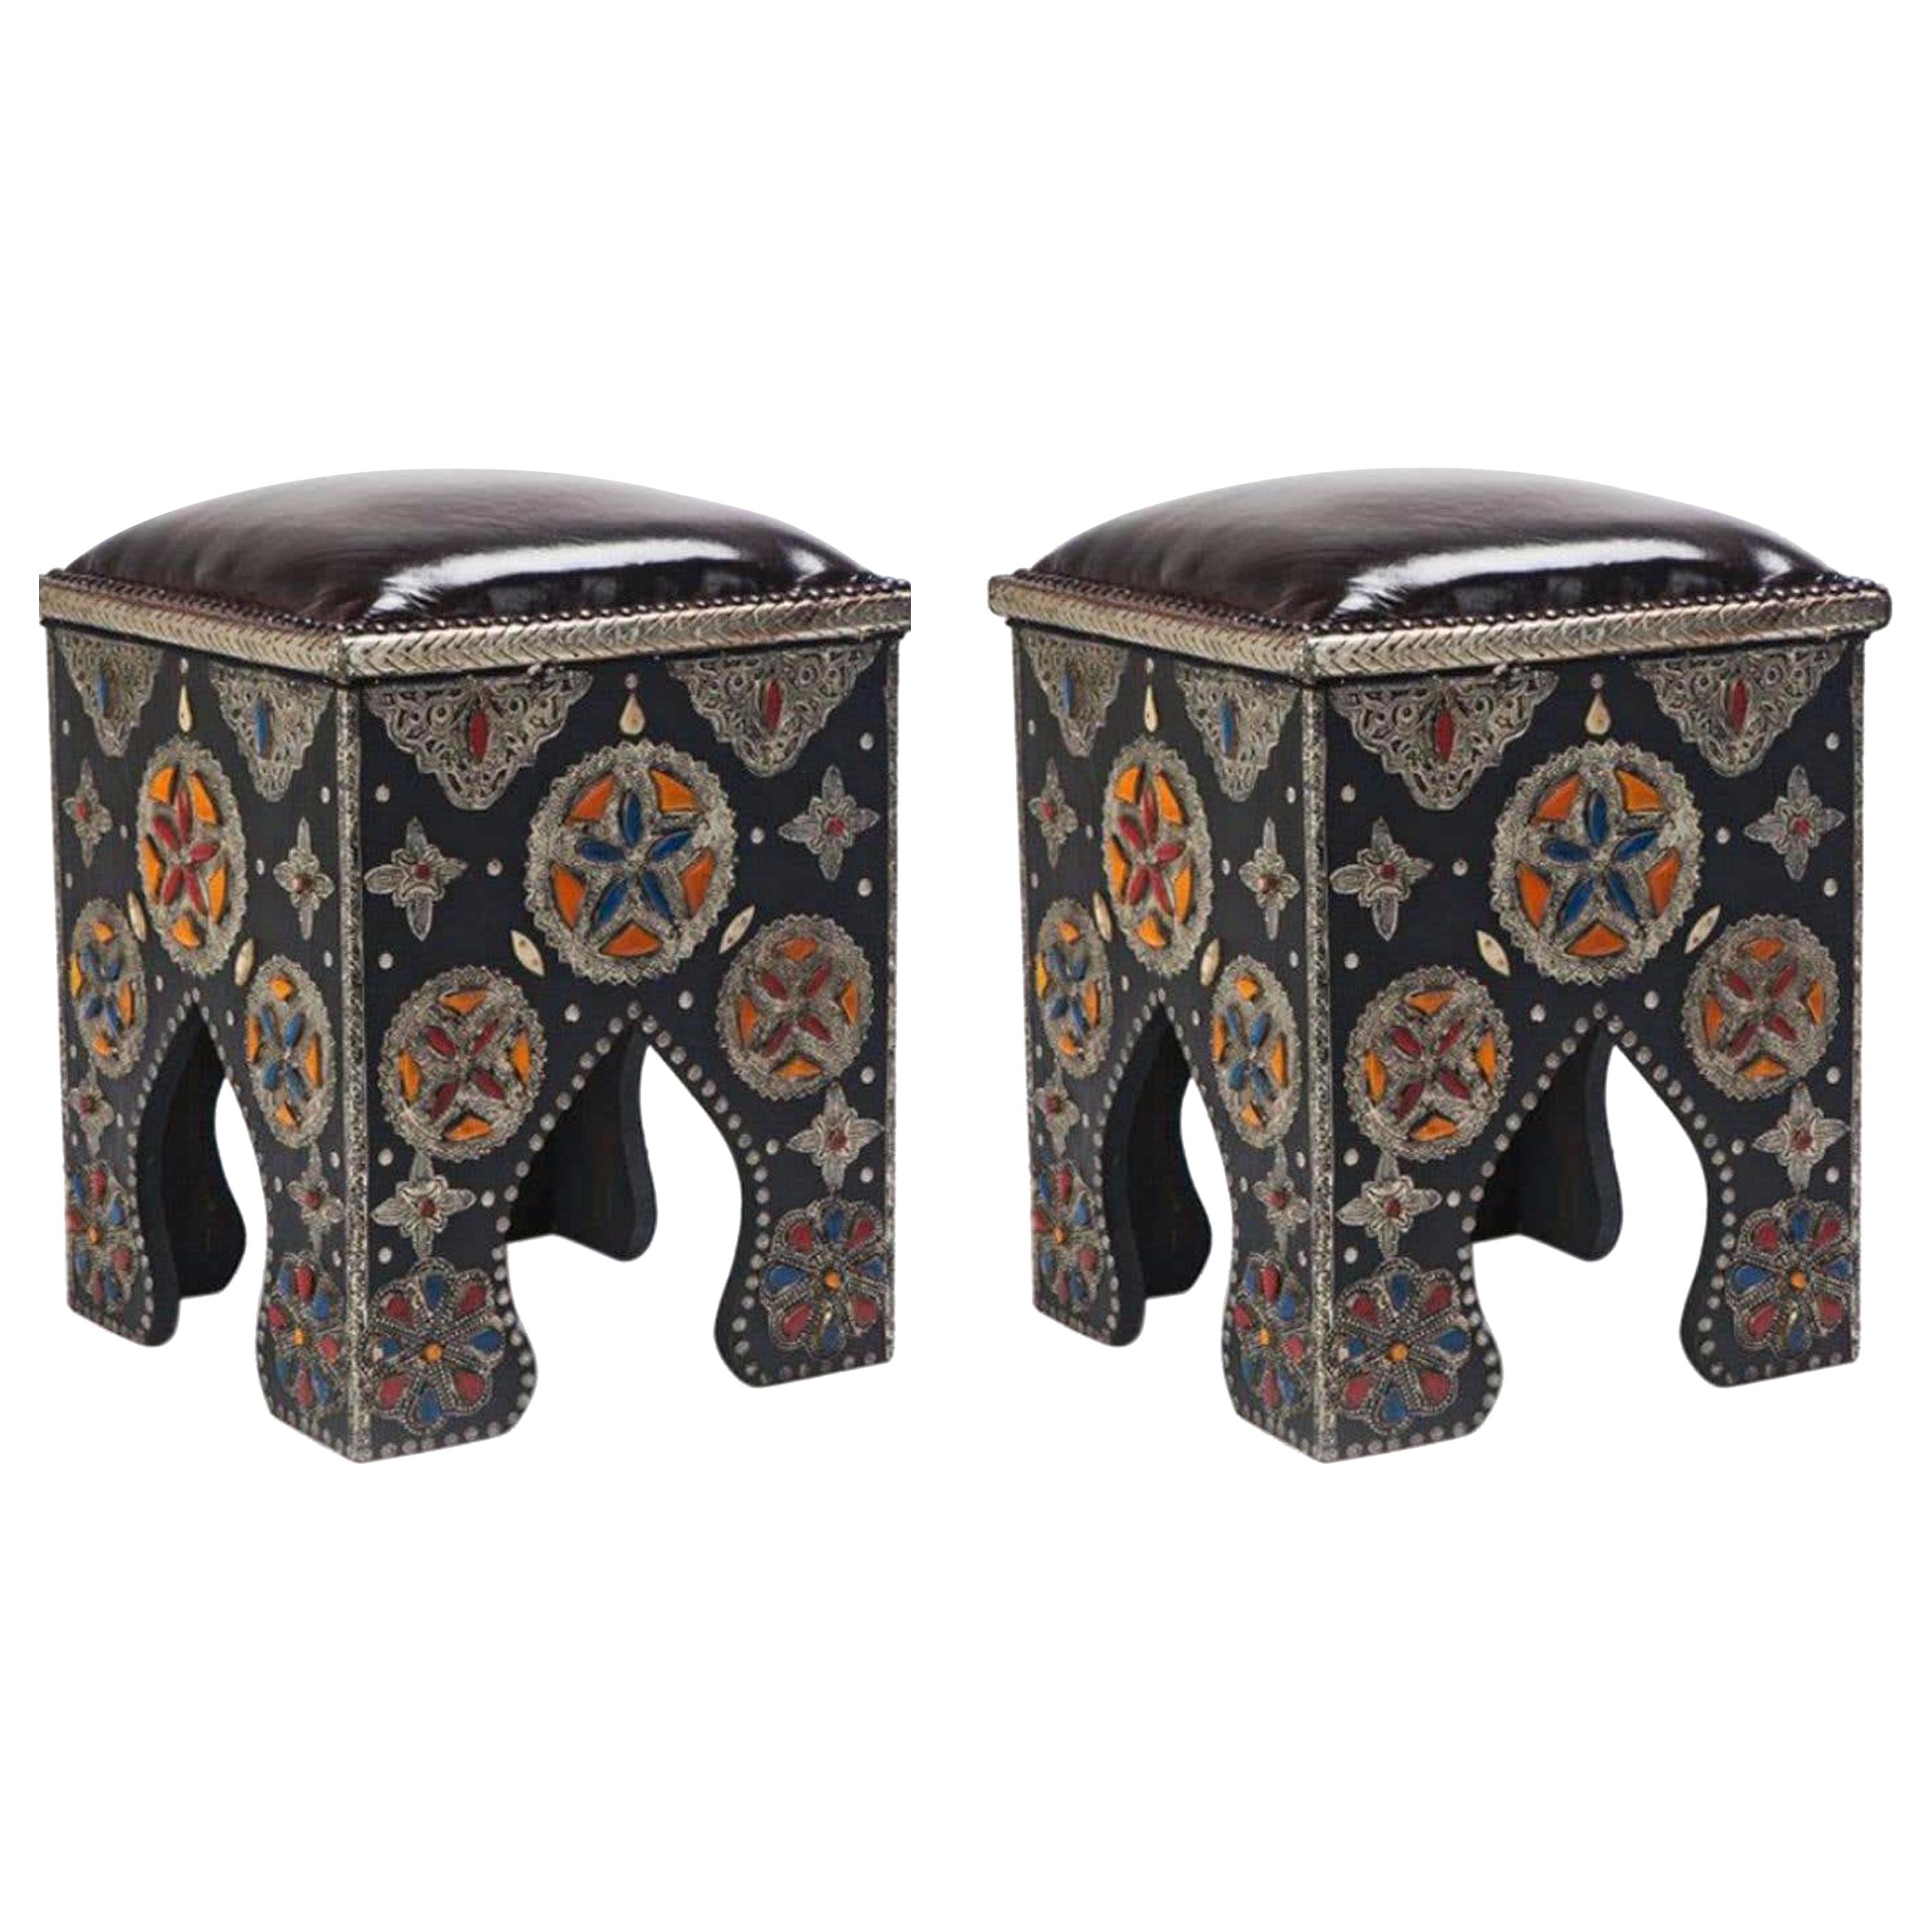 Hollywood Regency Style Moroccan Ottoman or Stool with Leather Top, a Pair